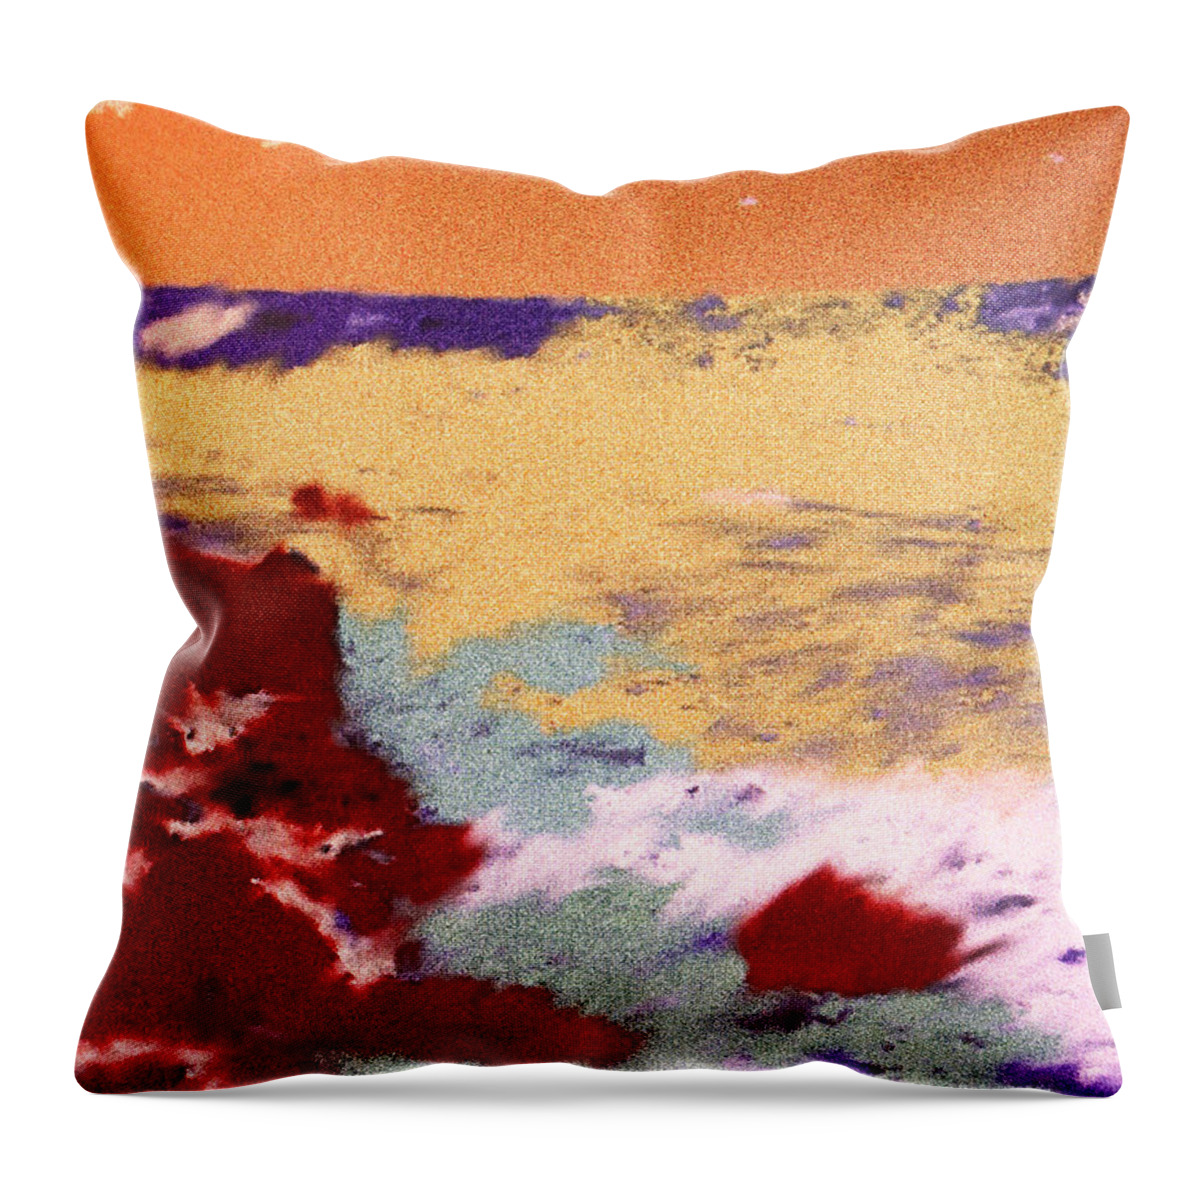 St Kitts Throw Pillow featuring the digital art End of the Journey by Ian MacDonald